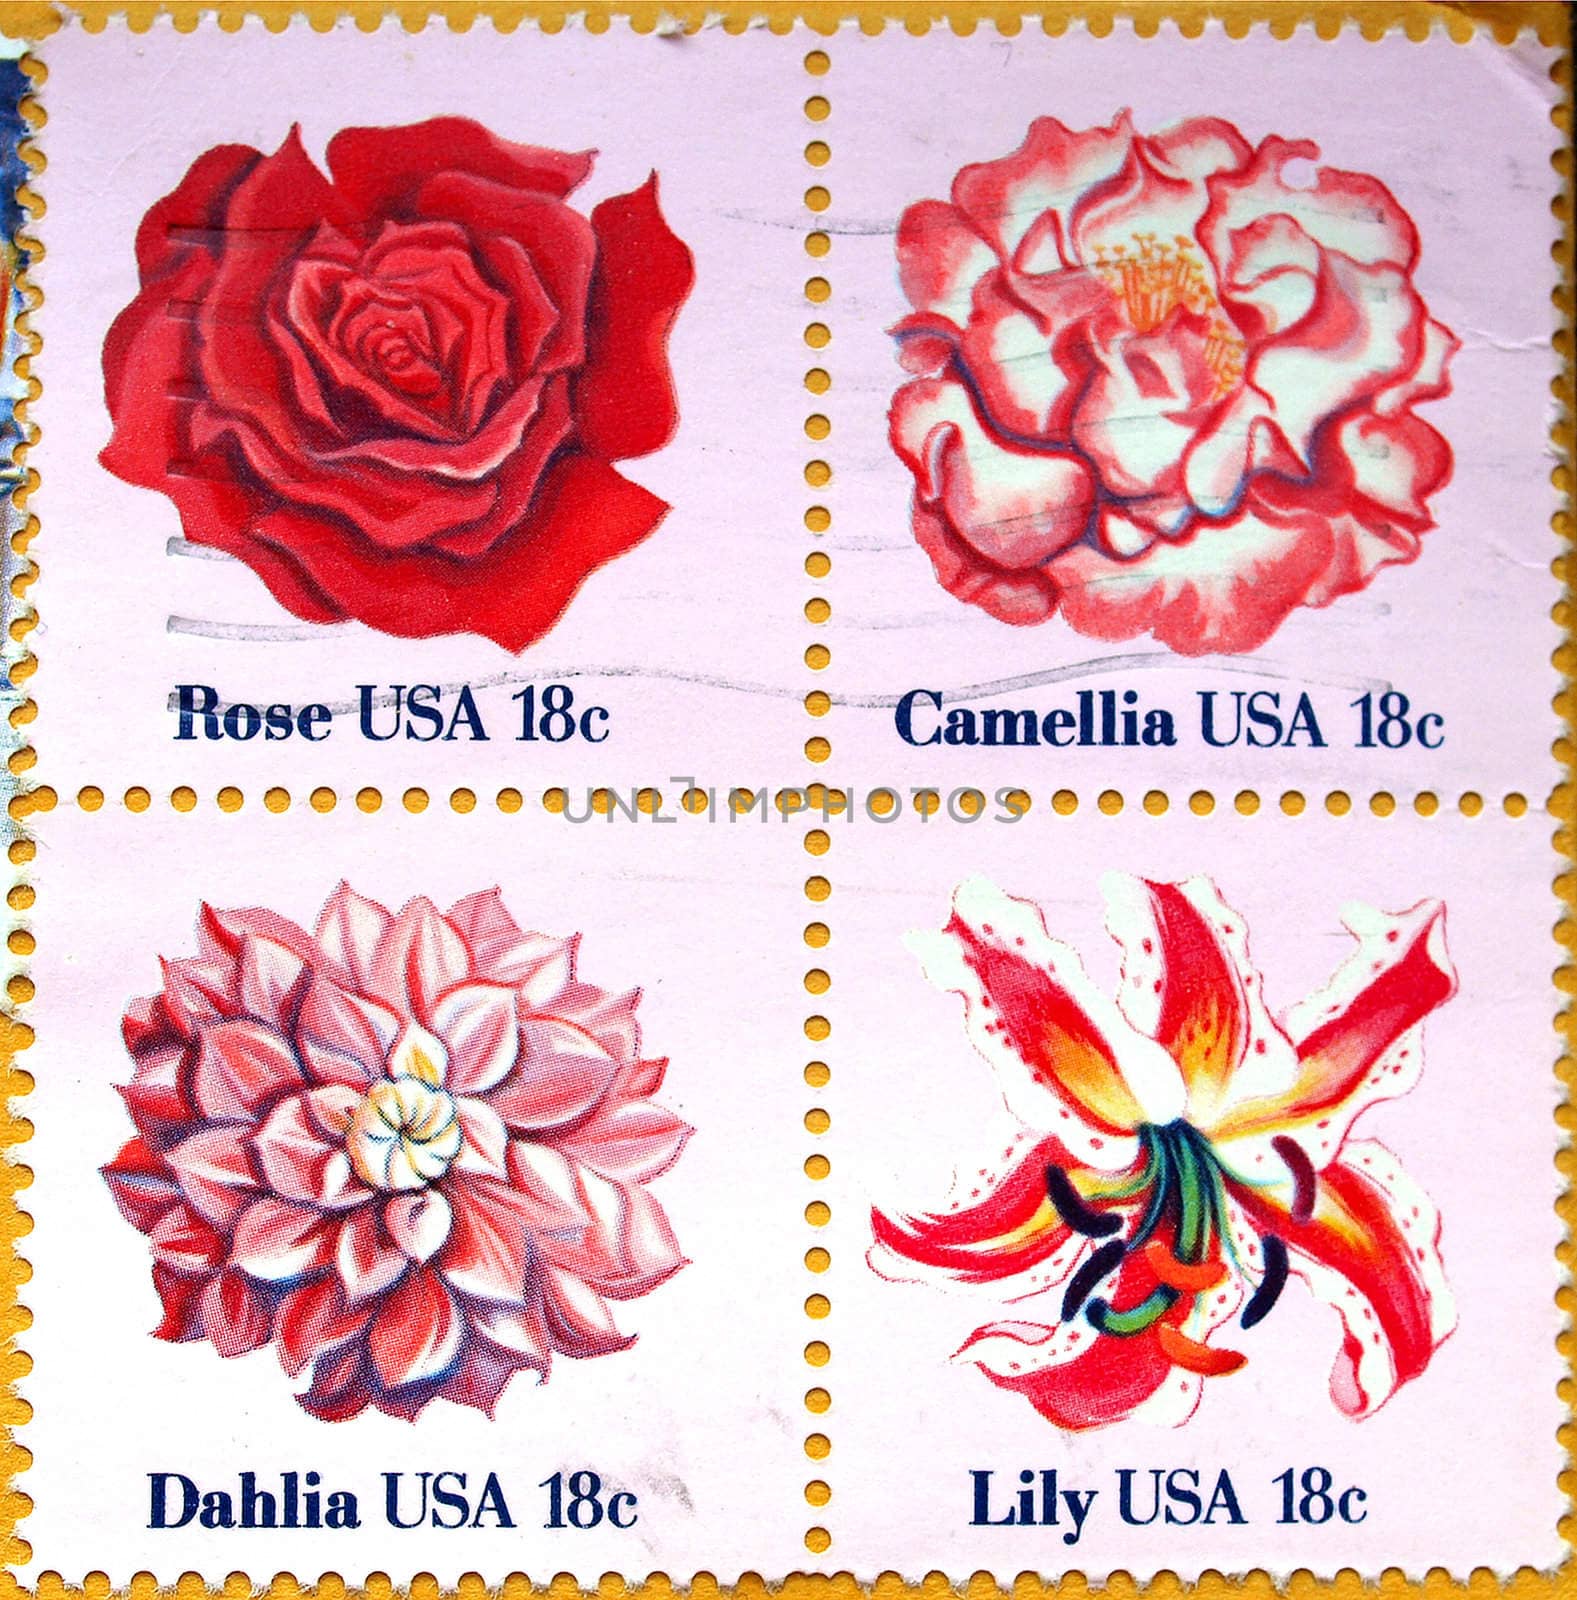 USA mail stamps